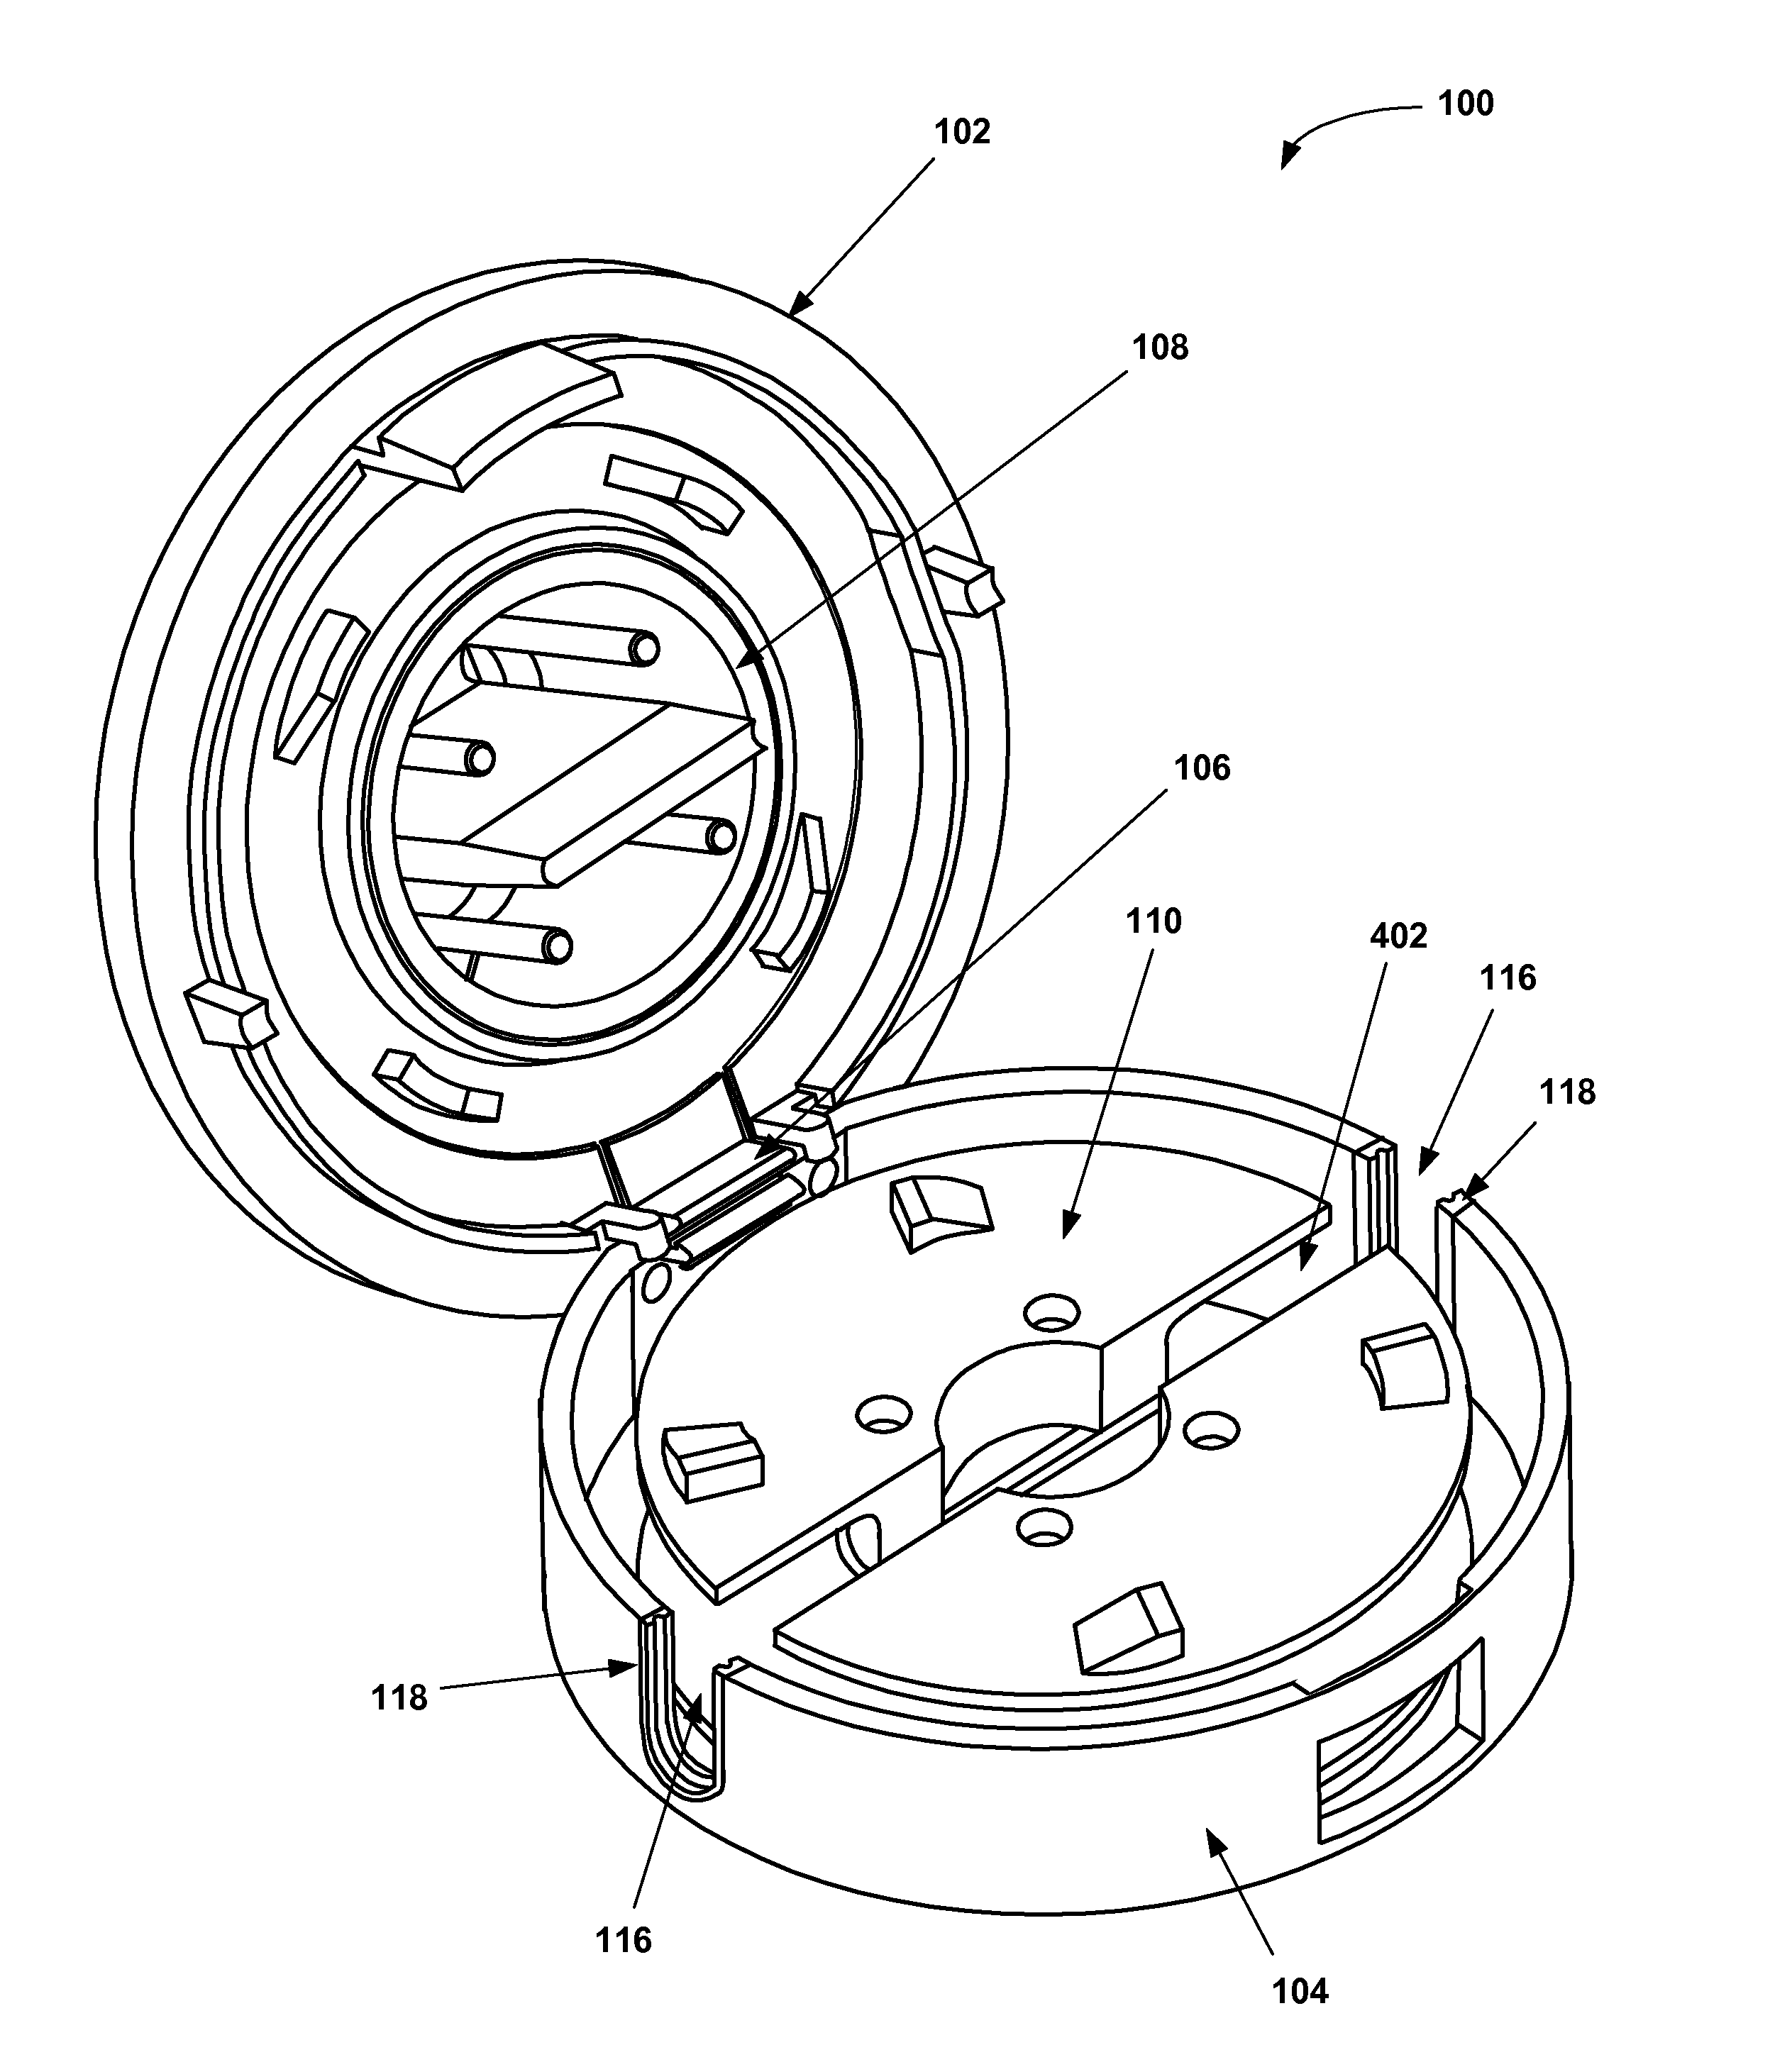 Trimmer head having a hinged housing for use in flexible line rotary trimmers systems